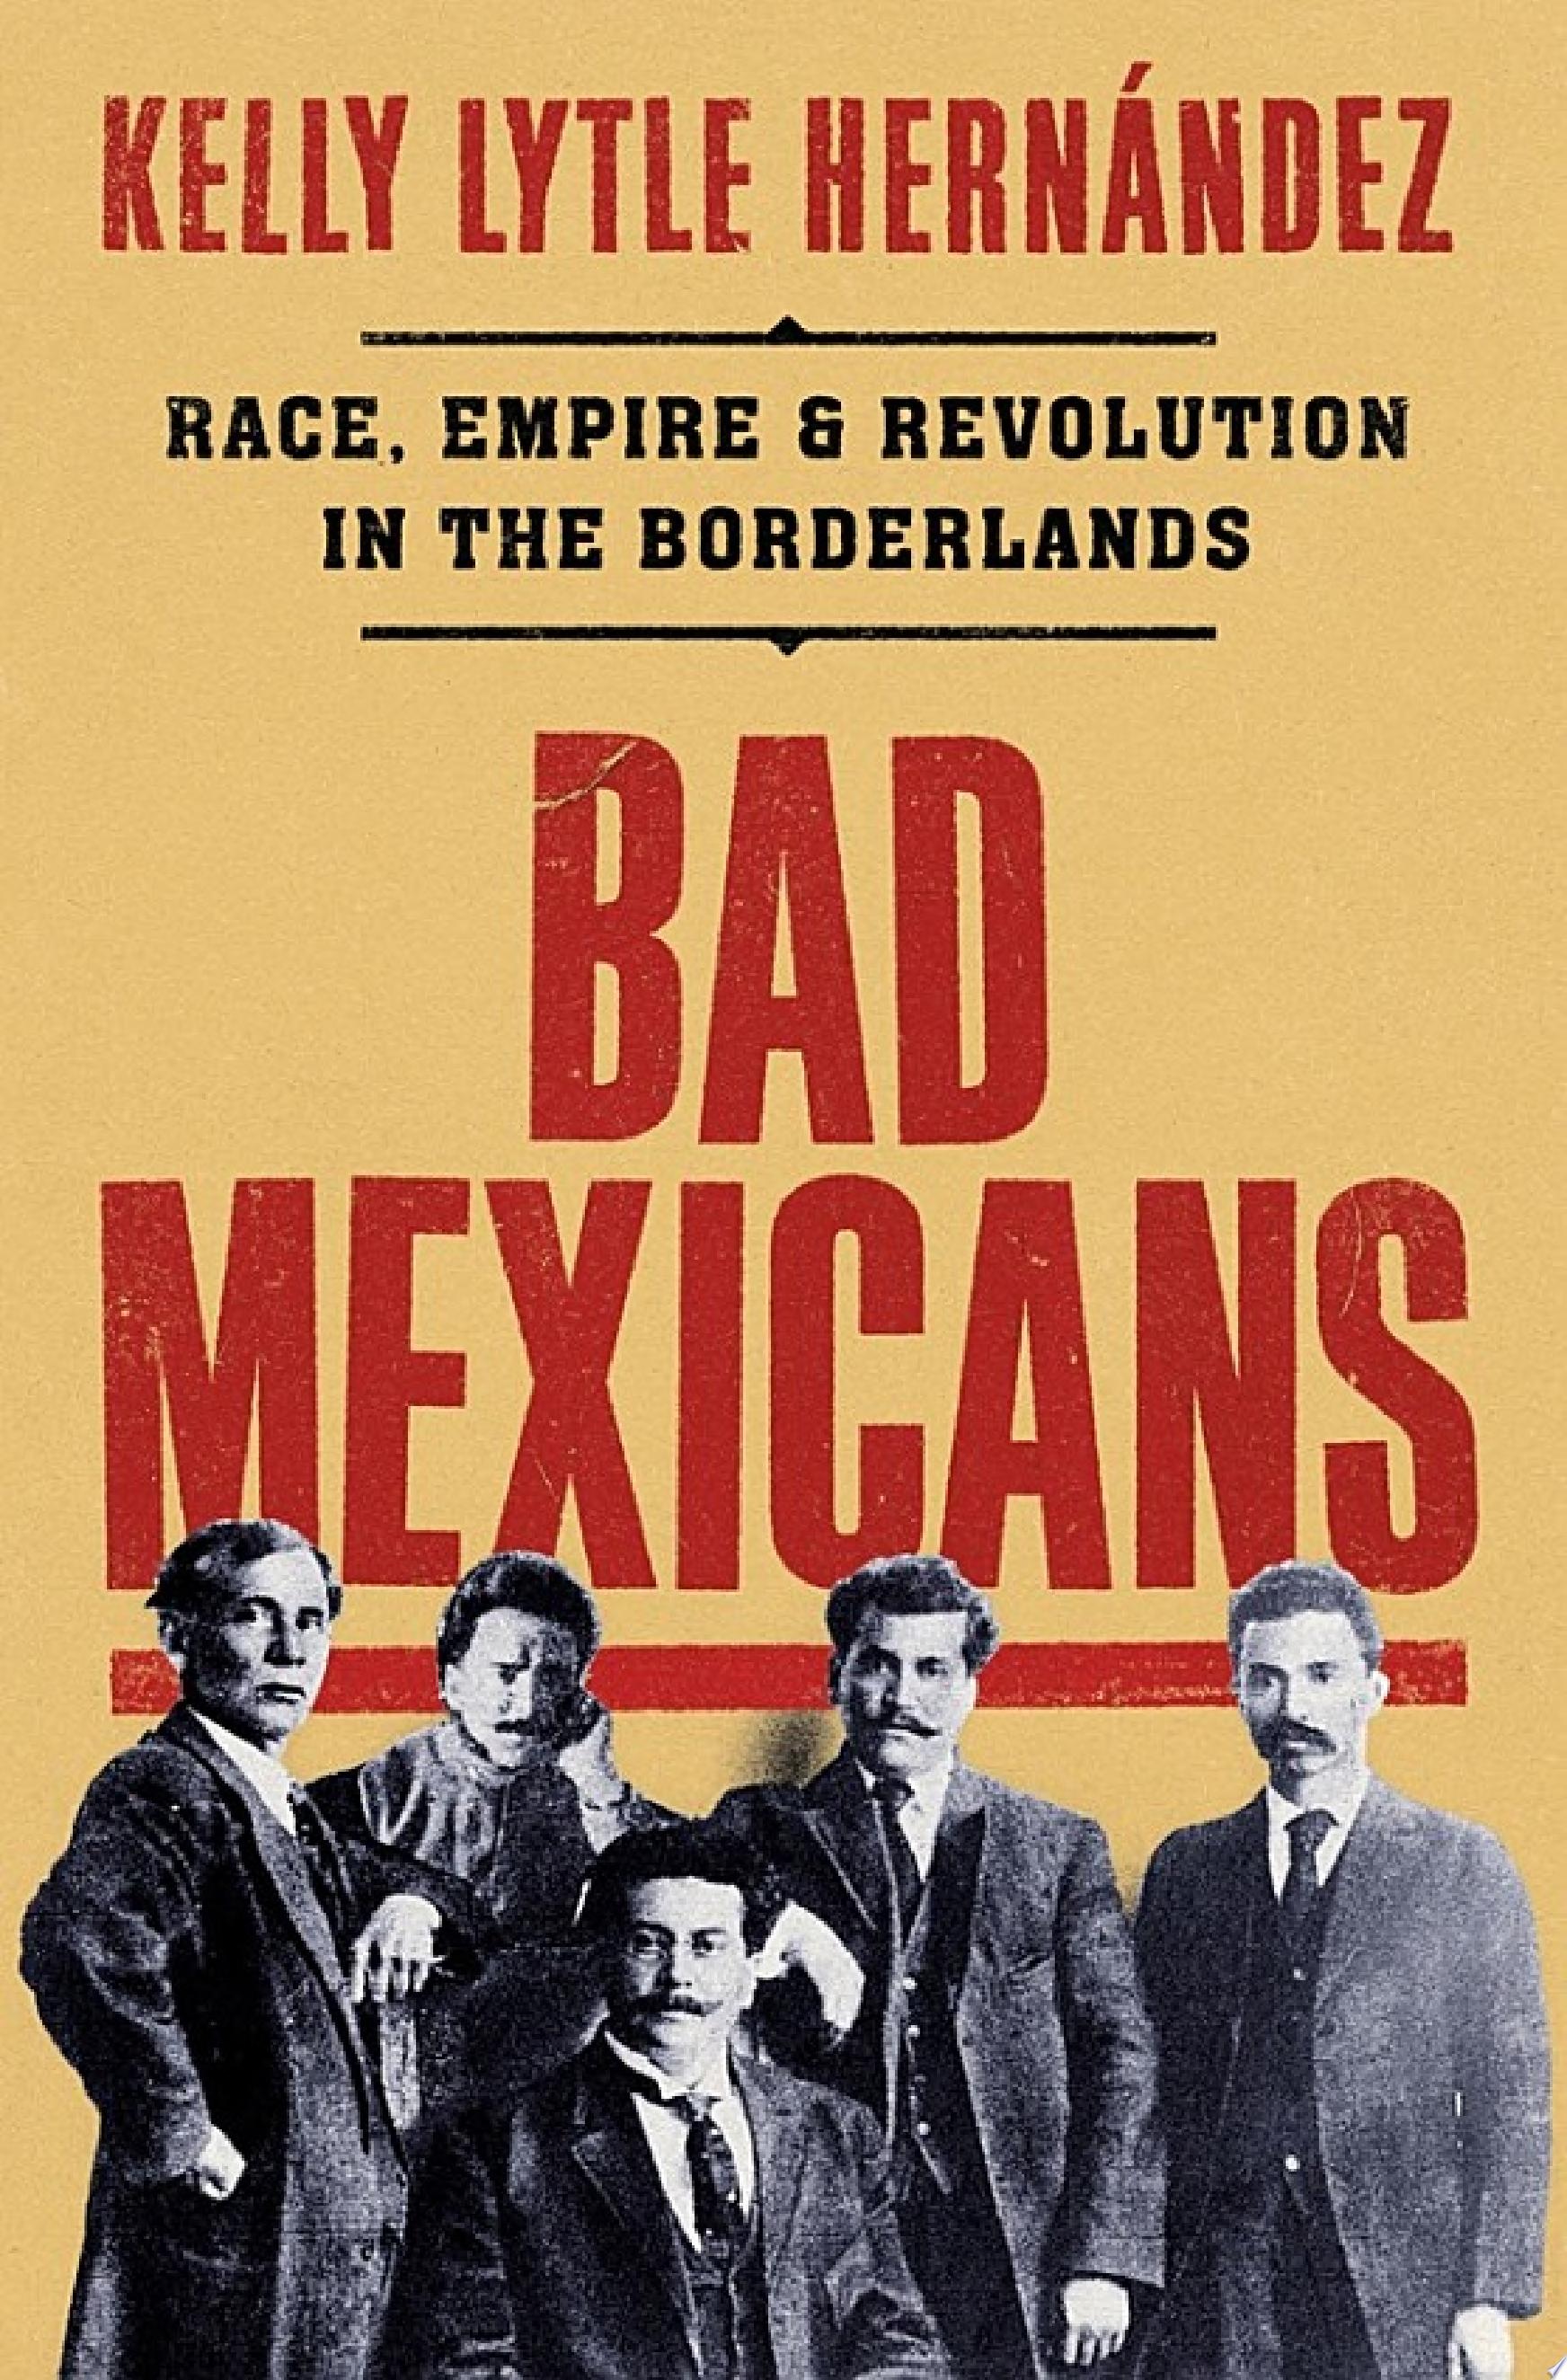 Image for "Bad Mexicans: Race, Empire, and Revolution in the Borderlands"